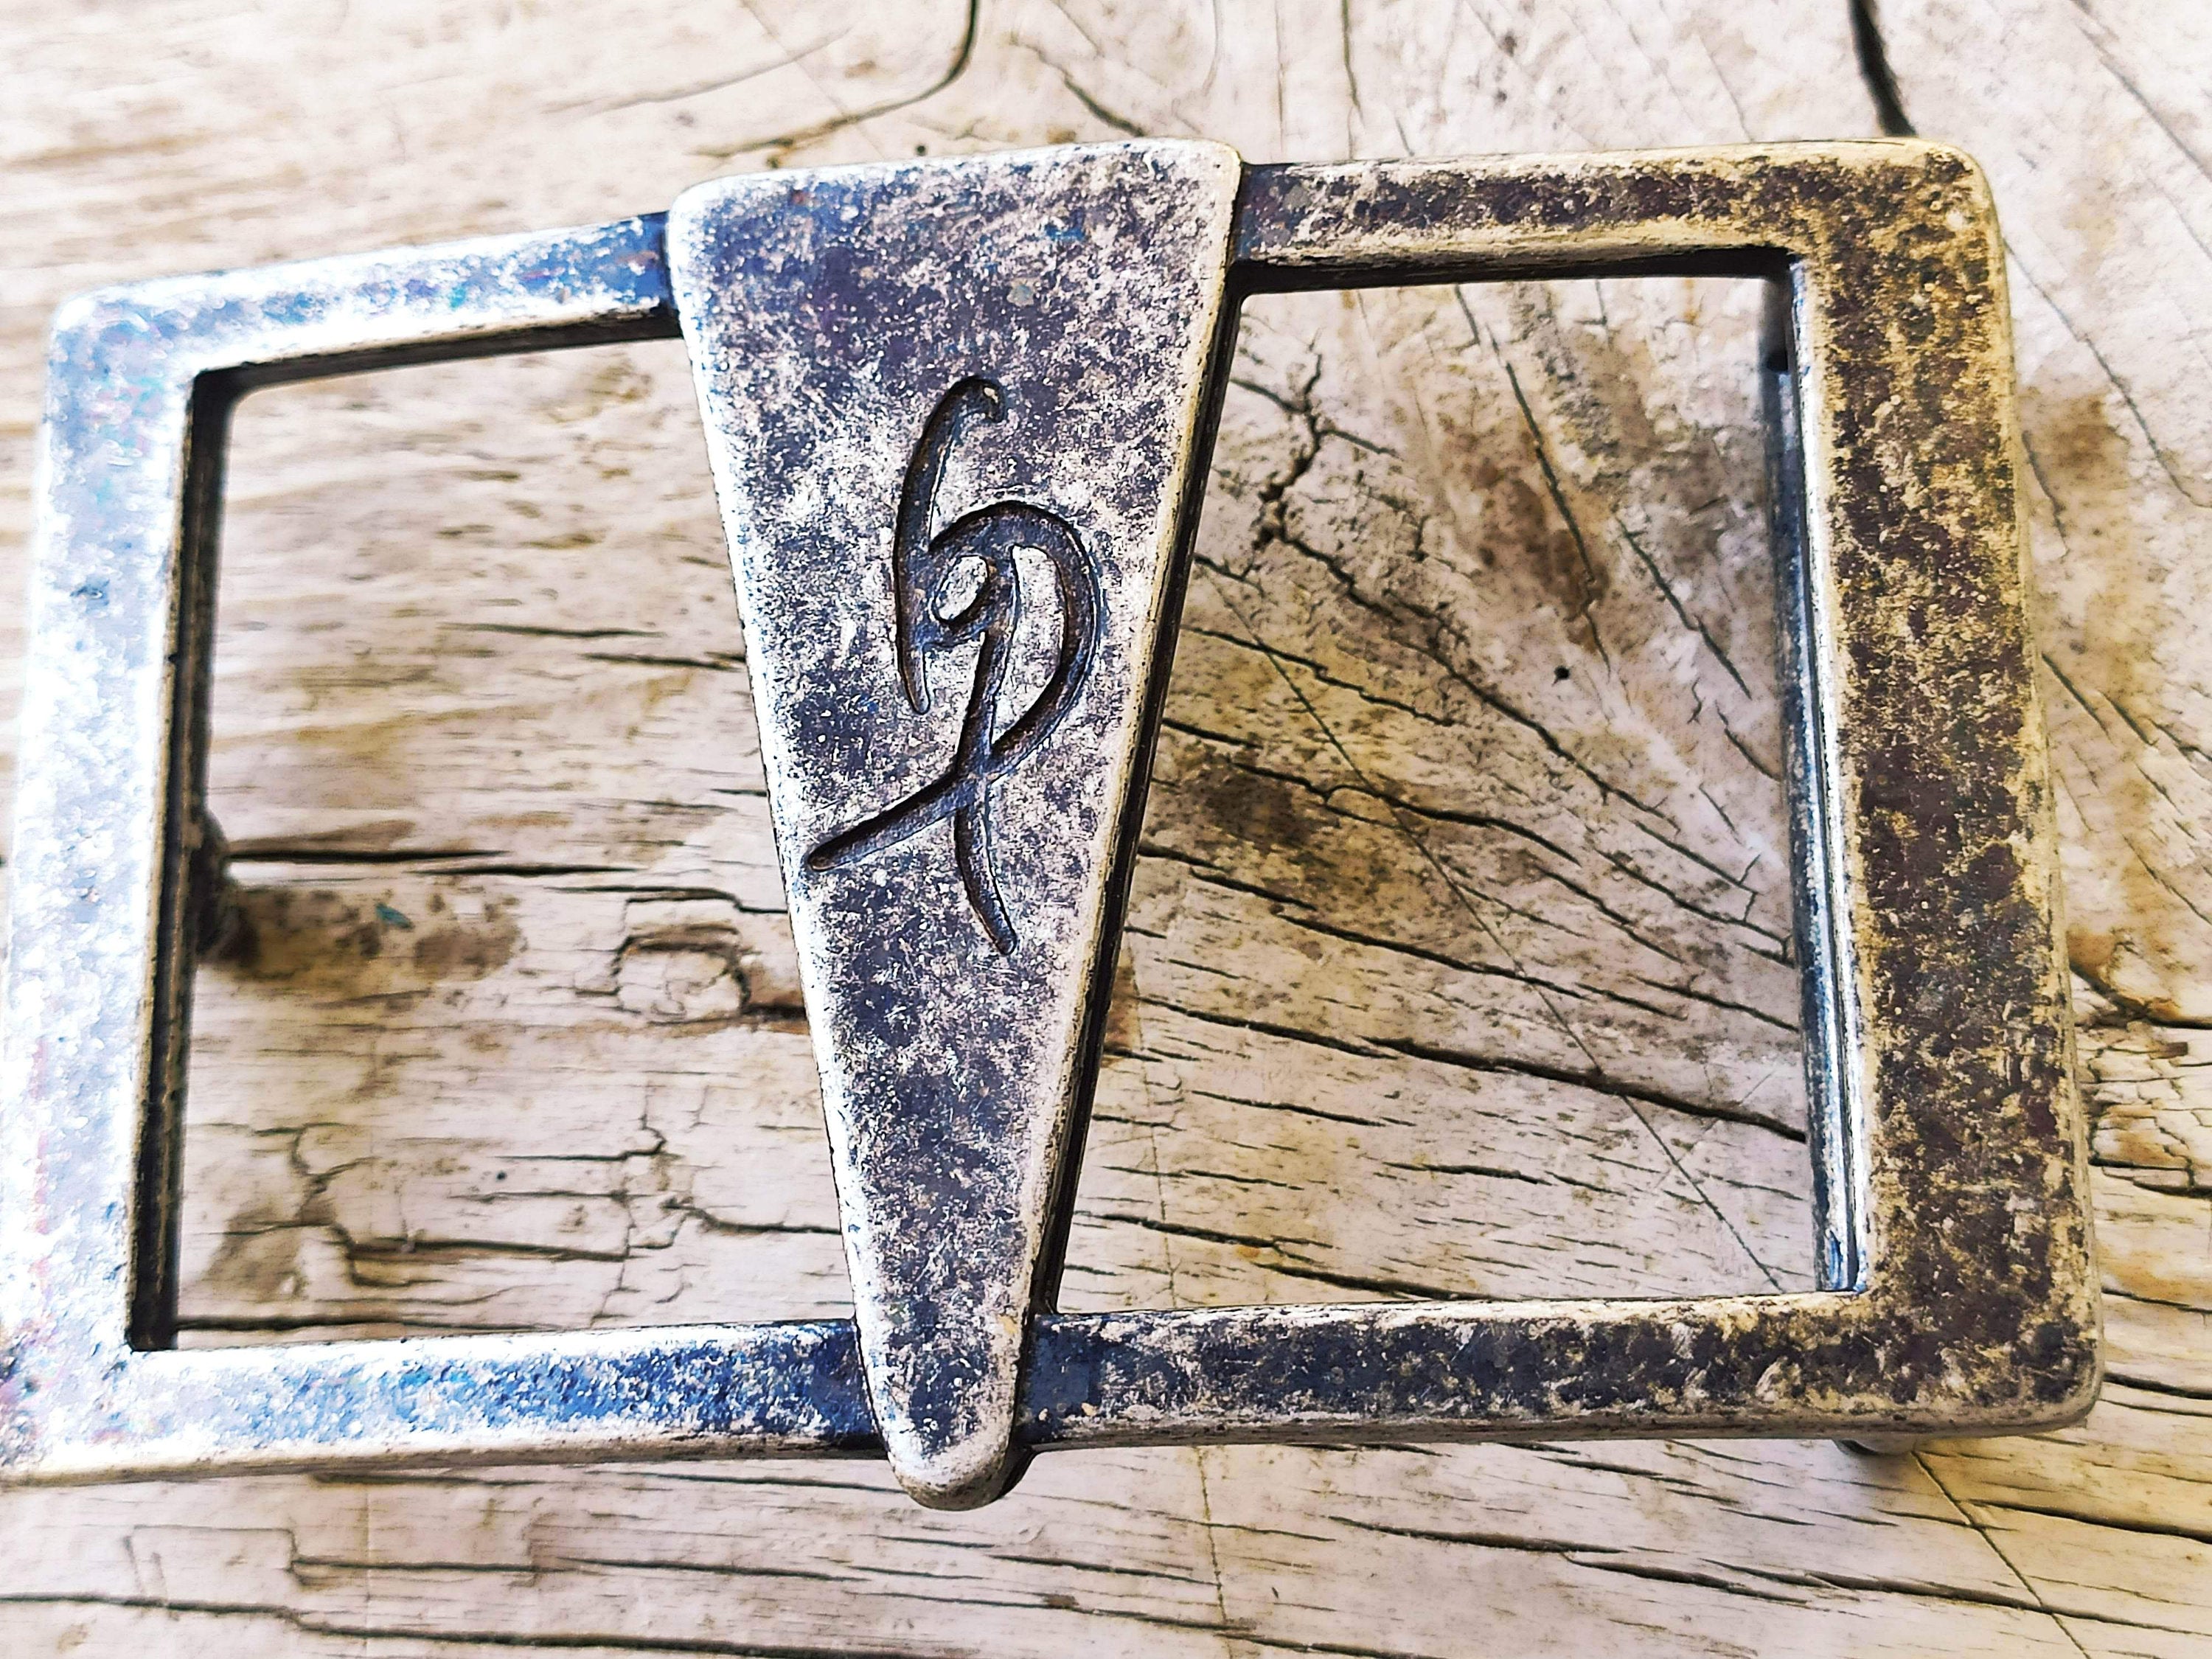 a Ishaor original buckle square buckle with a triangle in the center and Ishaor logo on it ,stunning buckle that will upgrade any belt